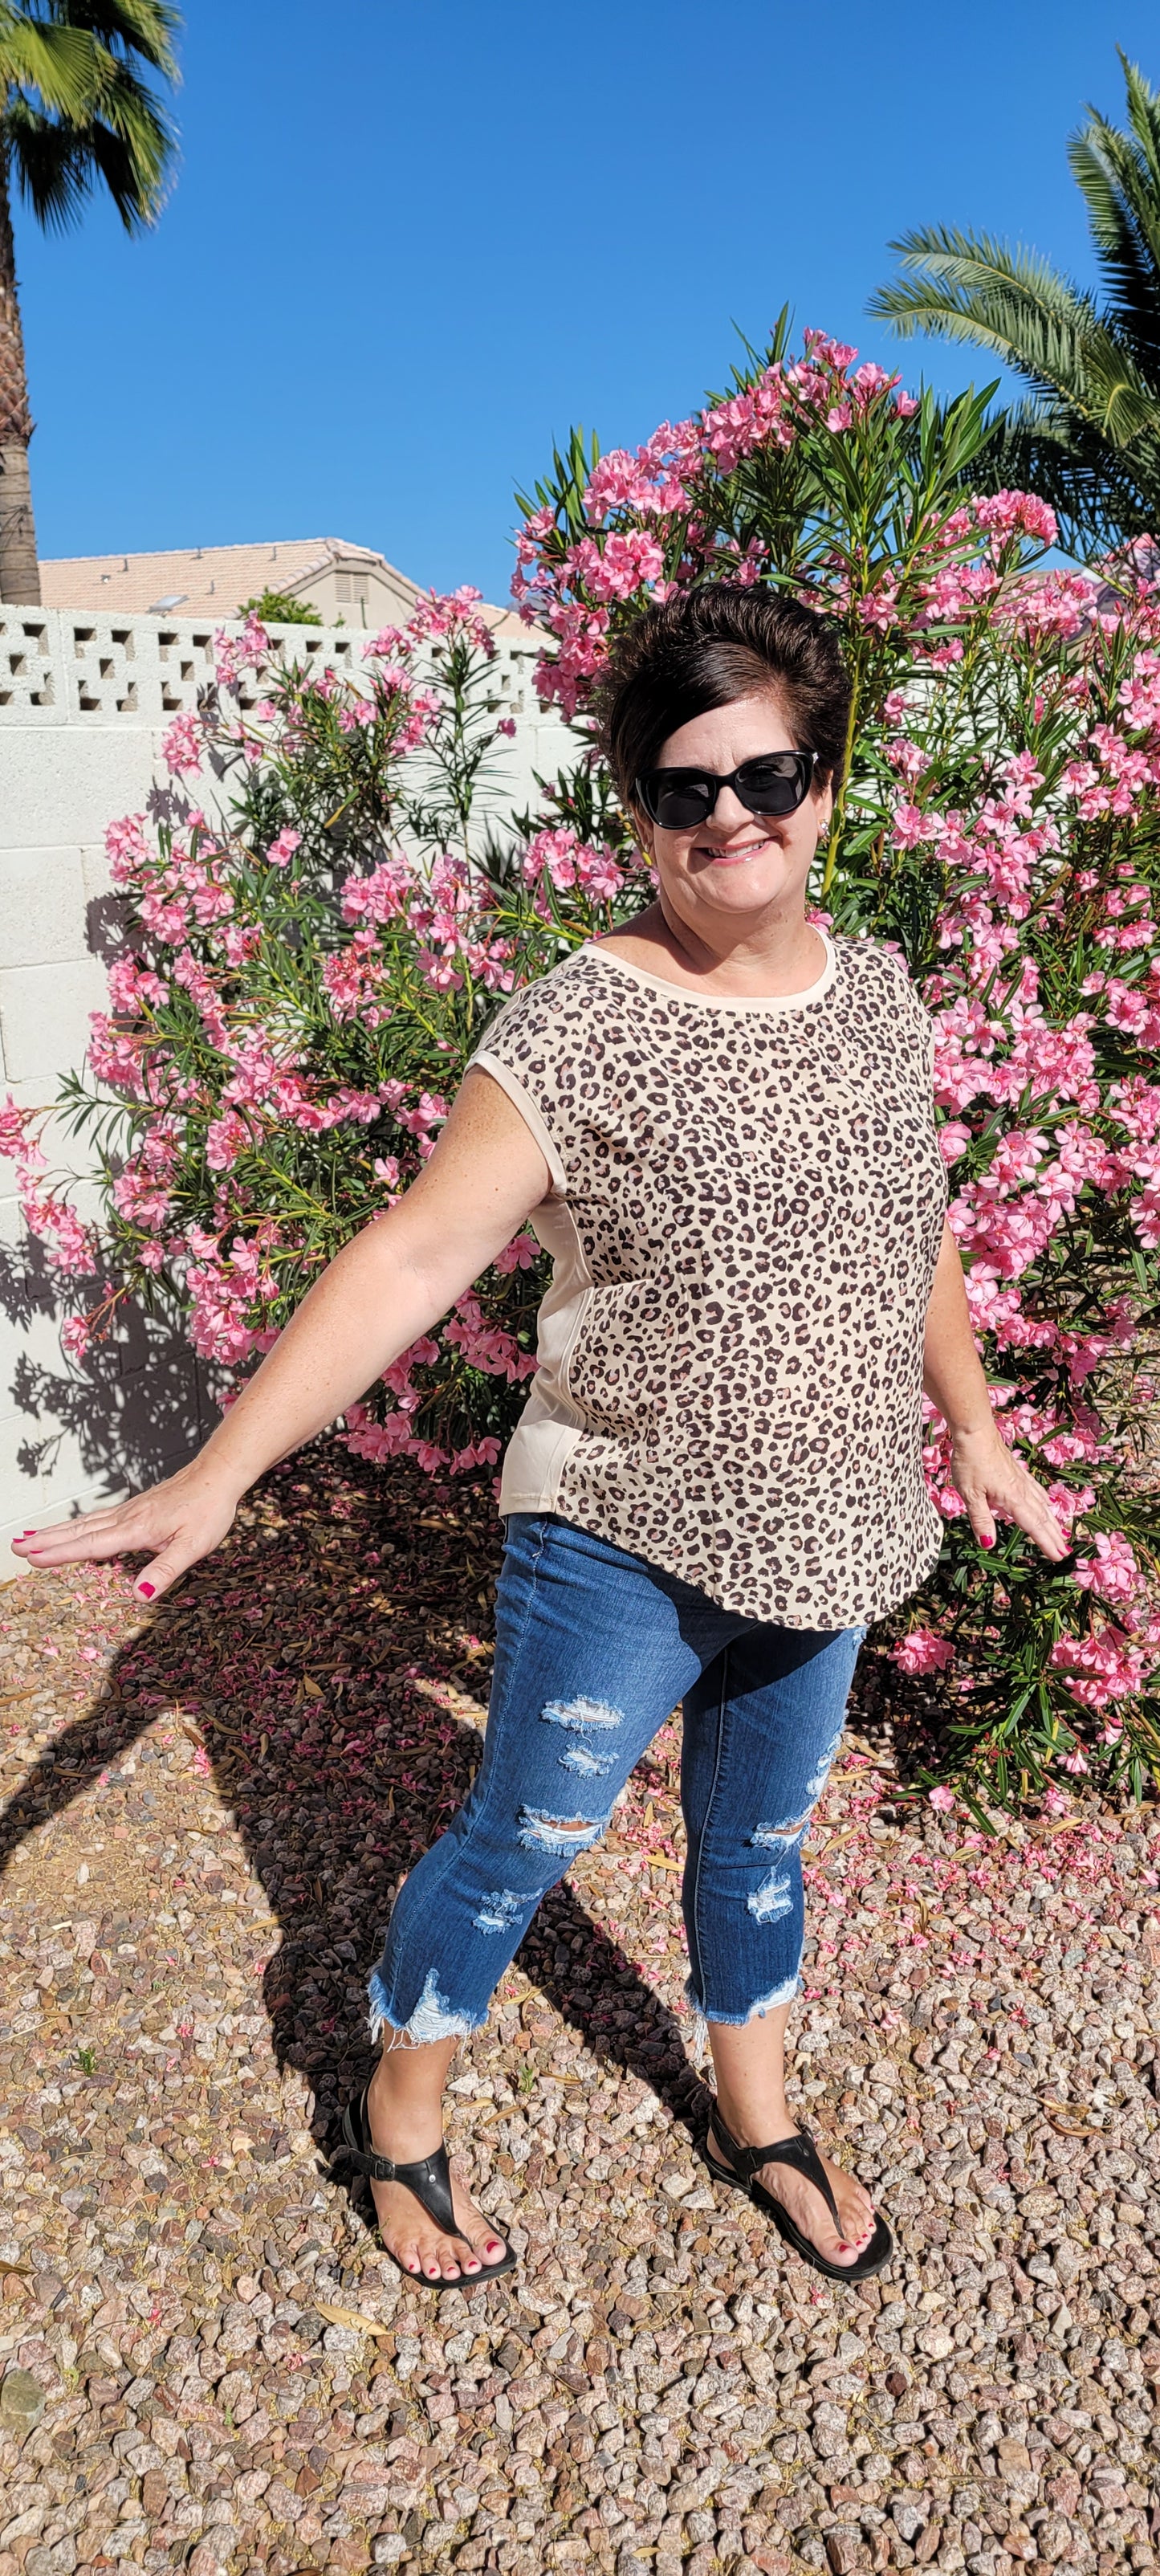 “Road Less Traveled” is a sleeveless top, with leopard print front (beige, brown, camel, agreeable gray) and contrast back, boat neckline, trimmed with beige soft modal, and rounded hemline. This is a satiny, silky soft high-low top. This is definitely a business or casual top. Sizes small through large.